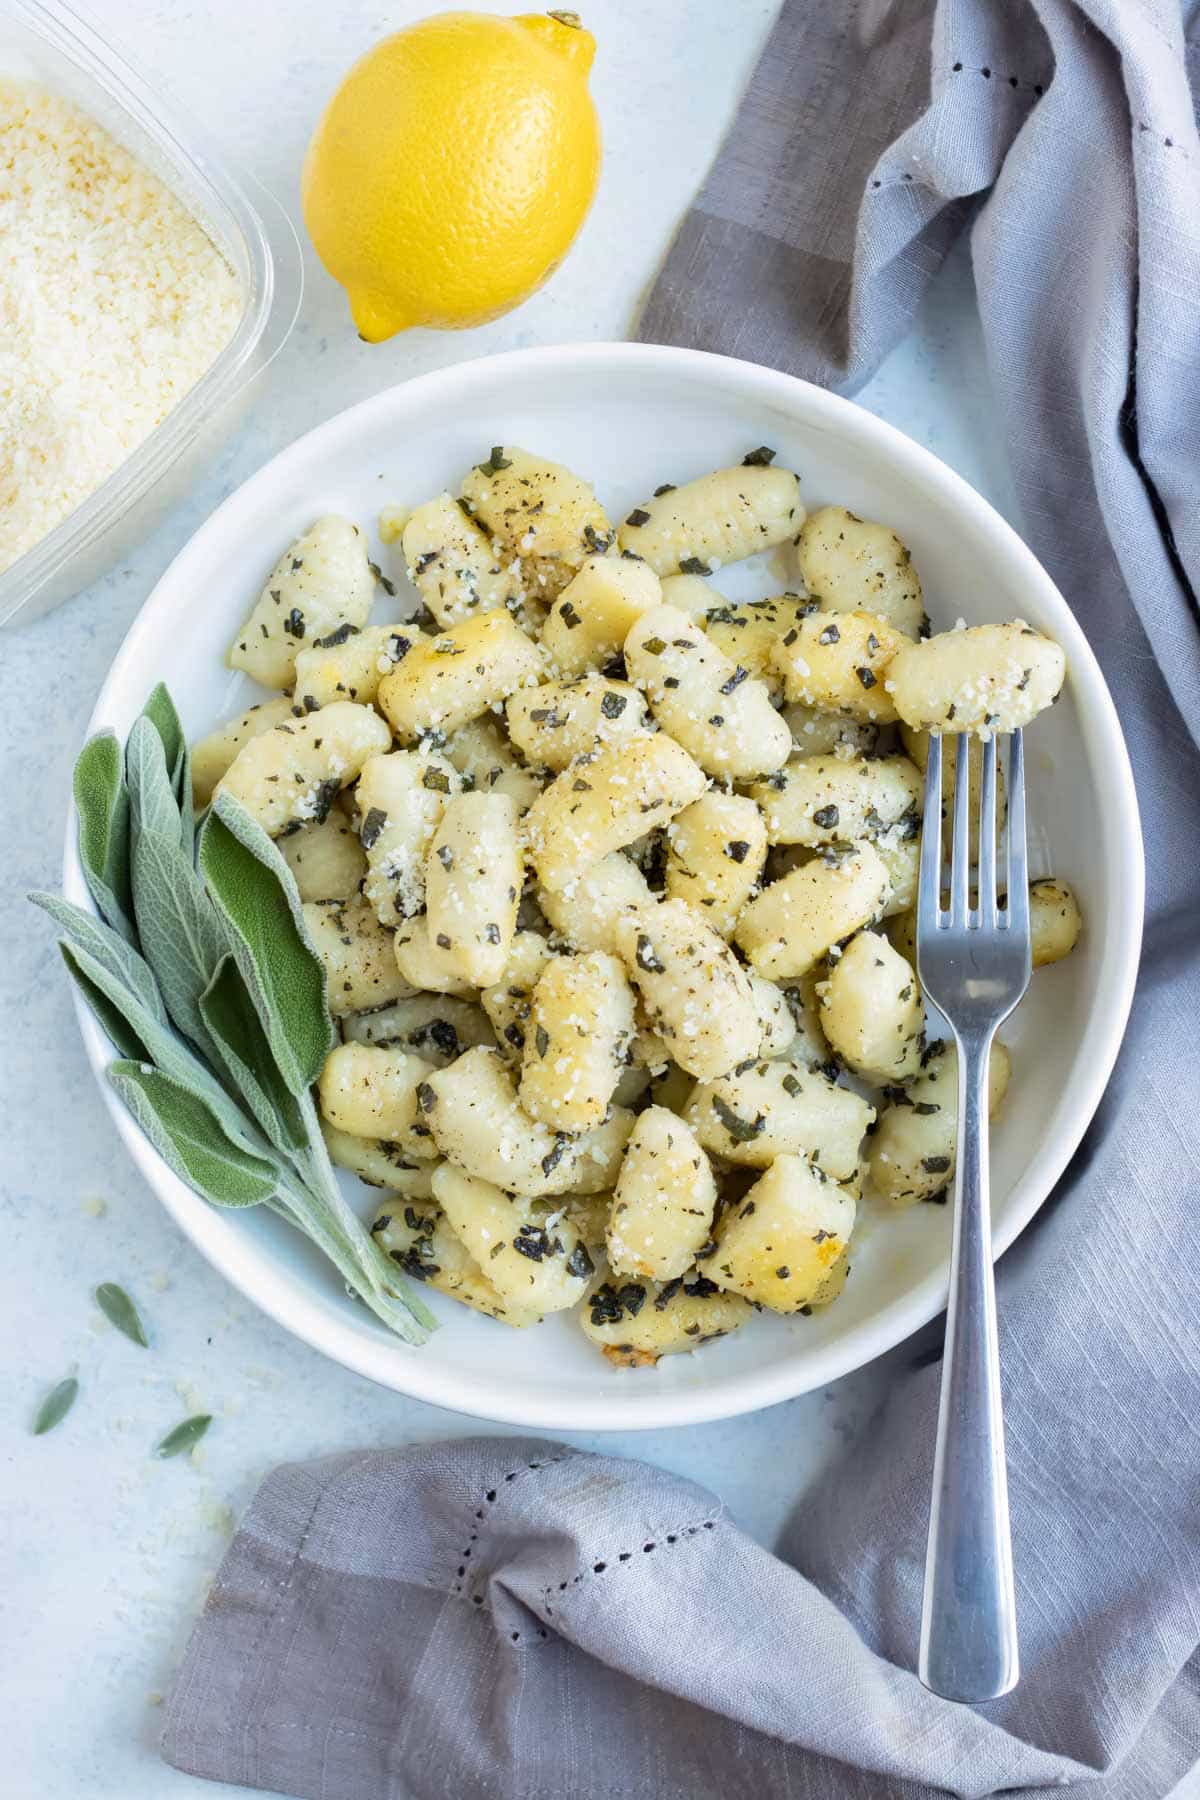 Lemon sage sauce is used to accompany the homemade gnocchi in a bowl.